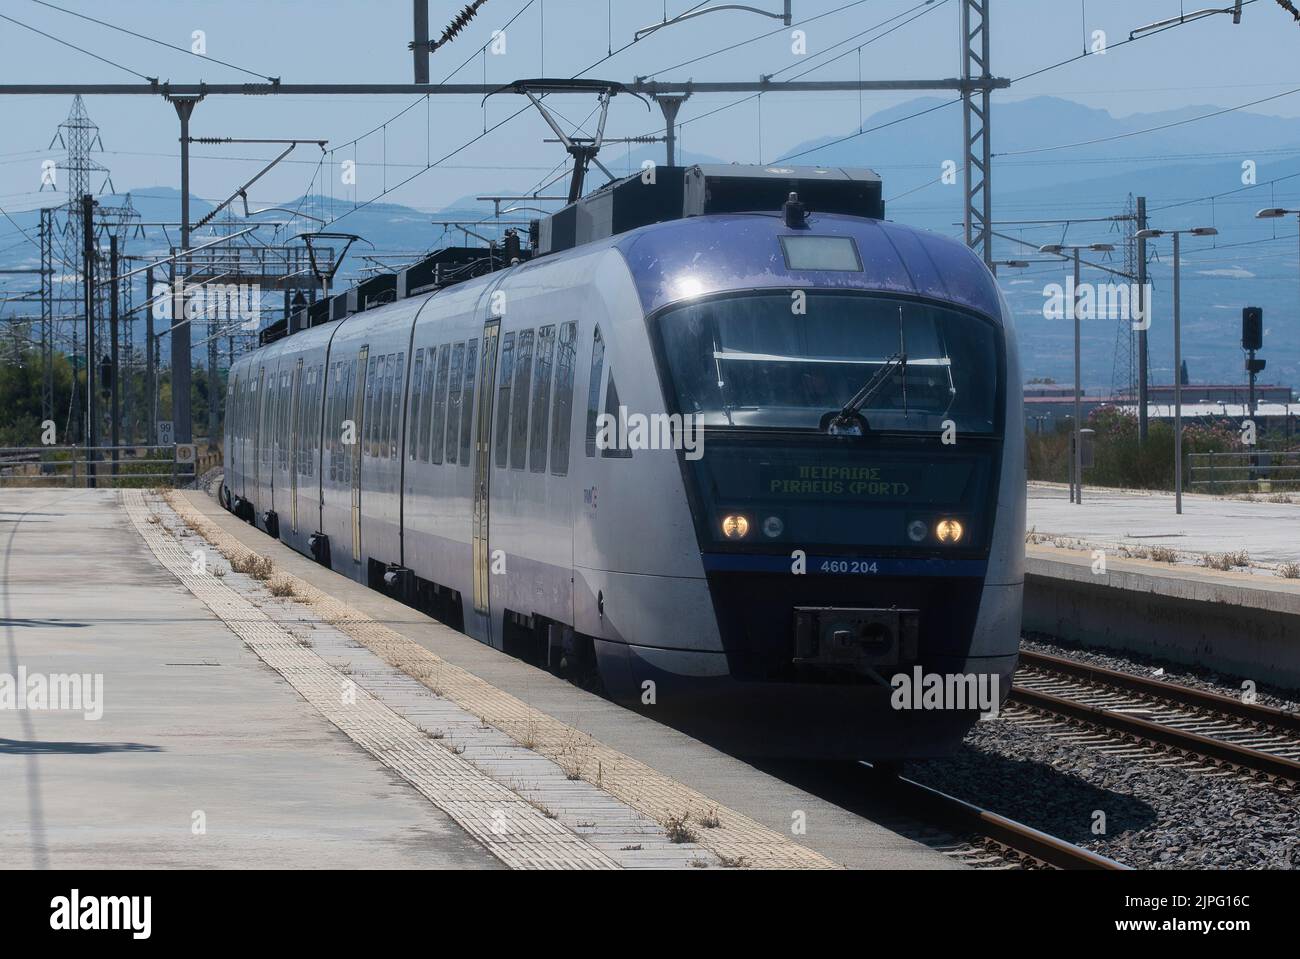 One of the few trains in Greece arriving at Corinth station in Summer Stock Photo